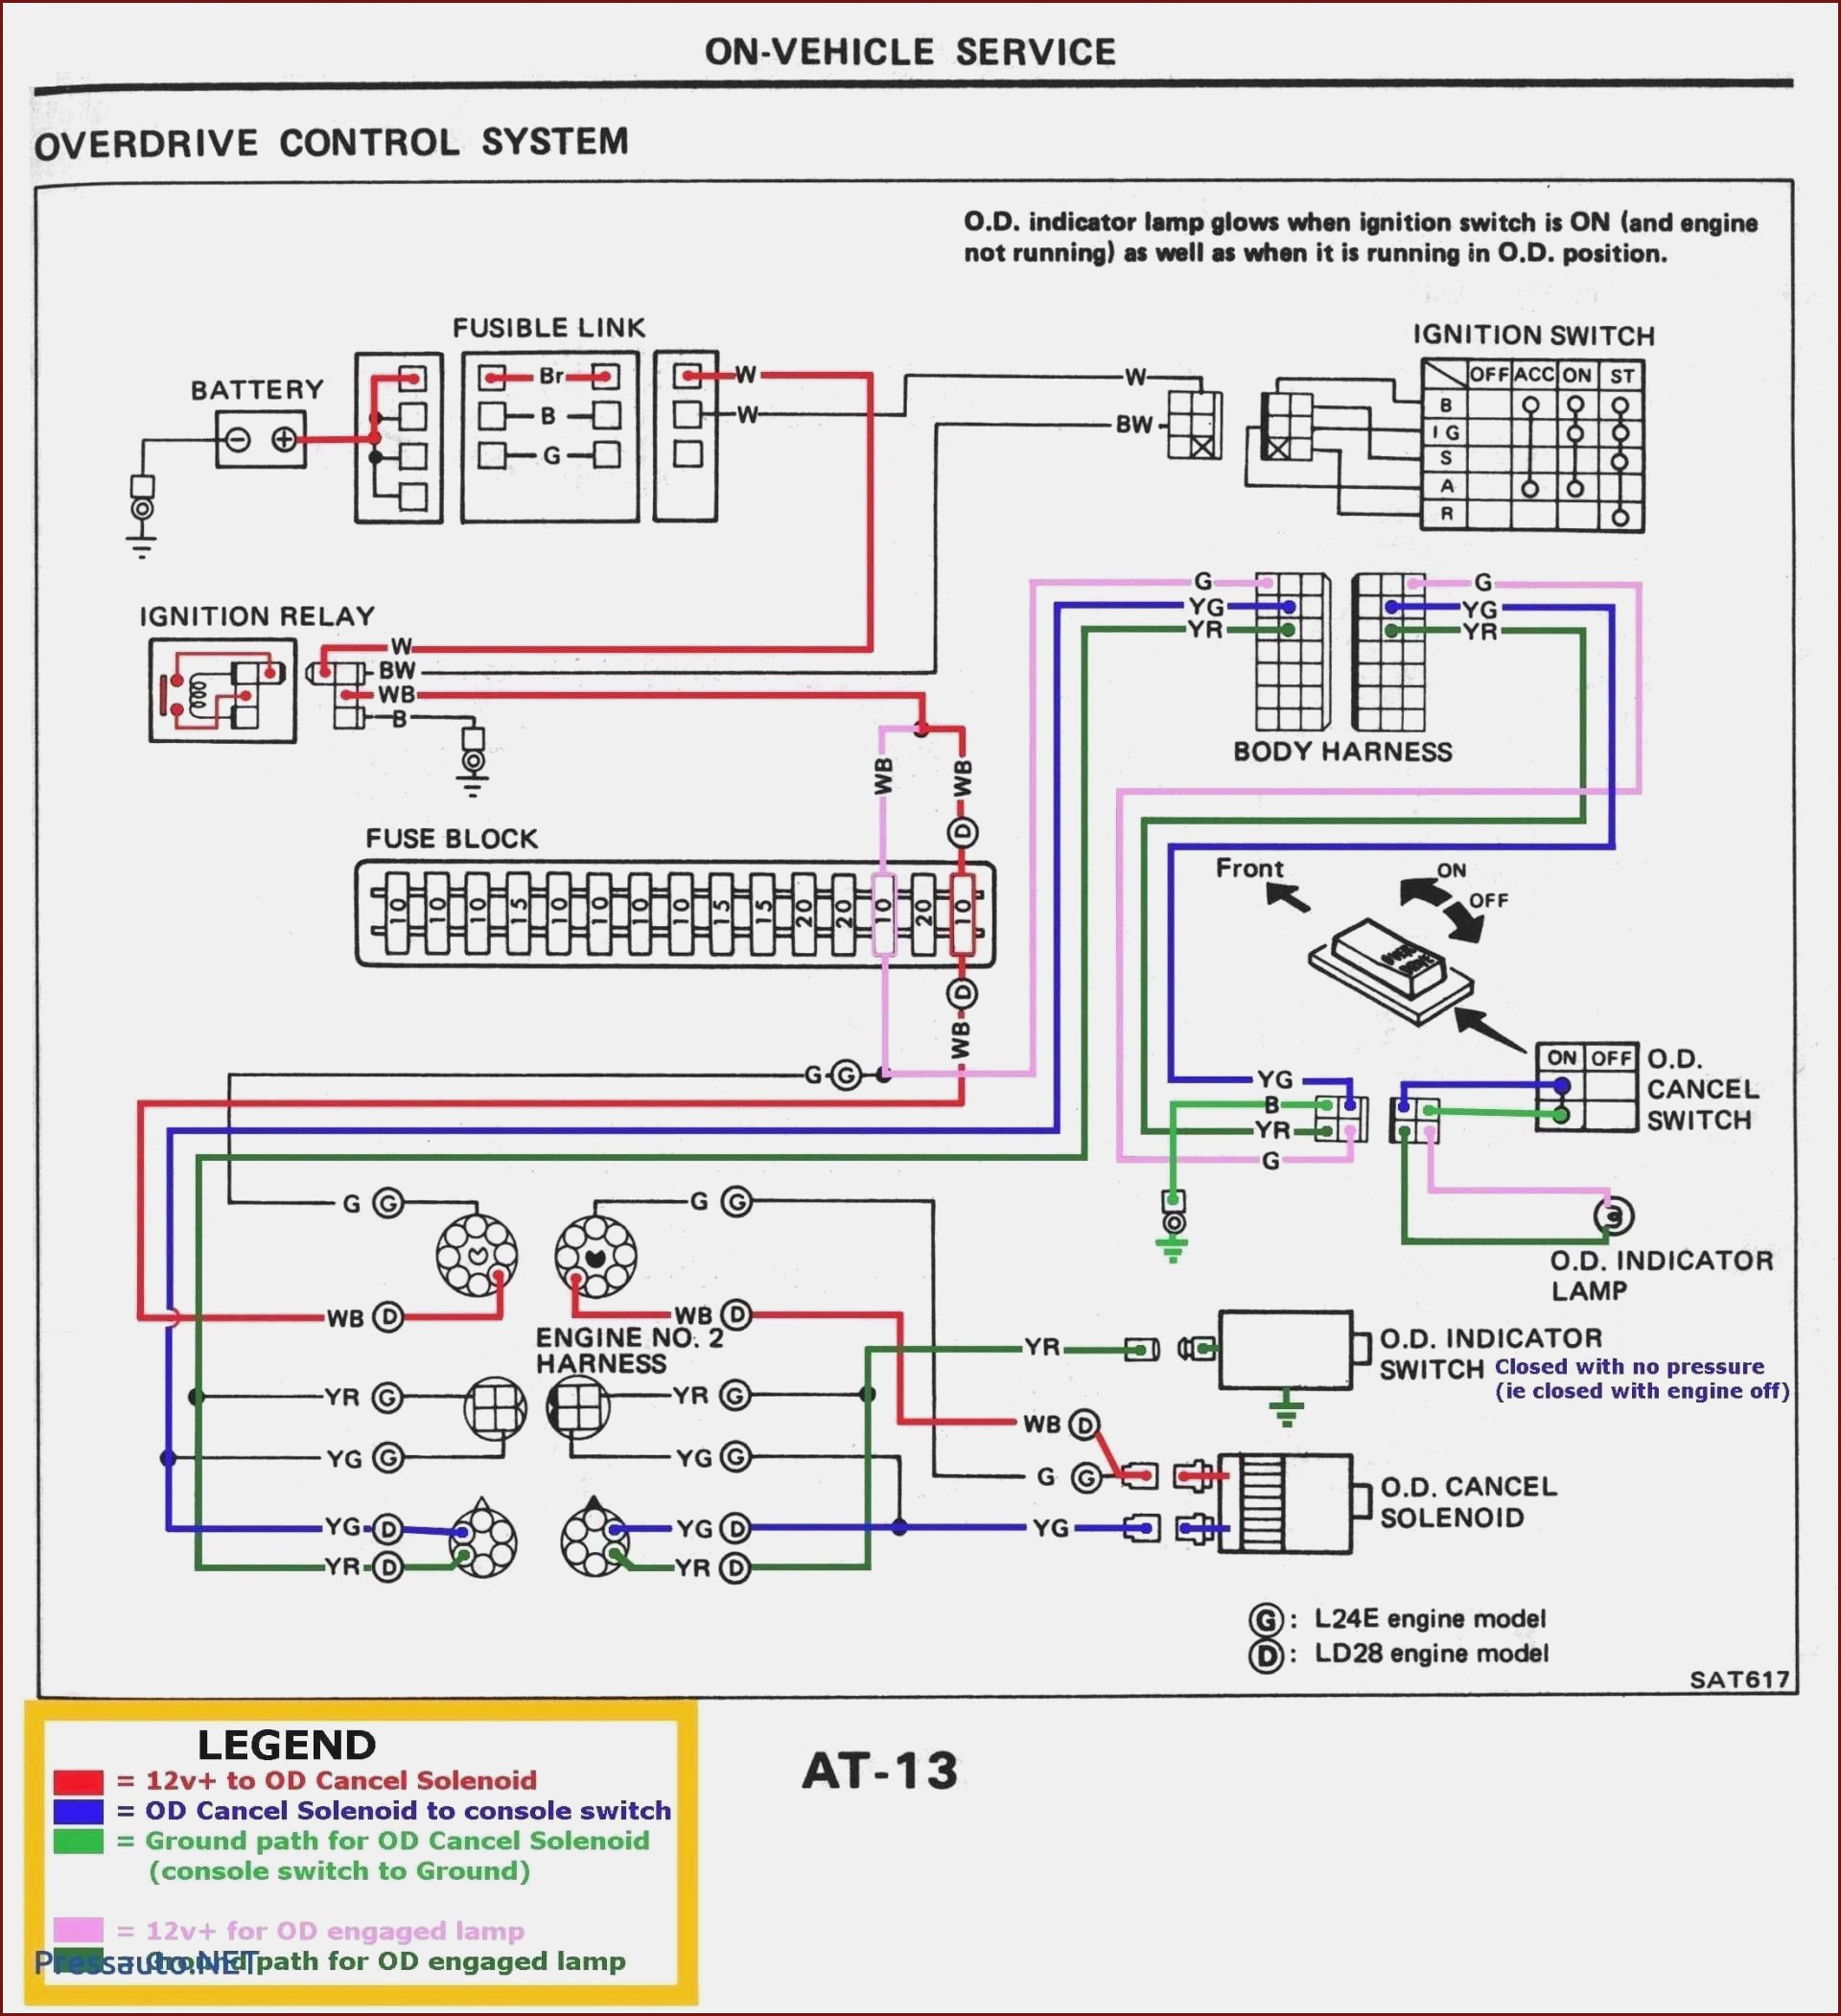 Steering assembly Diagram Cc4 Rv Fleetwood Savanna Wiring Diagram Of Steering assembly Diagram